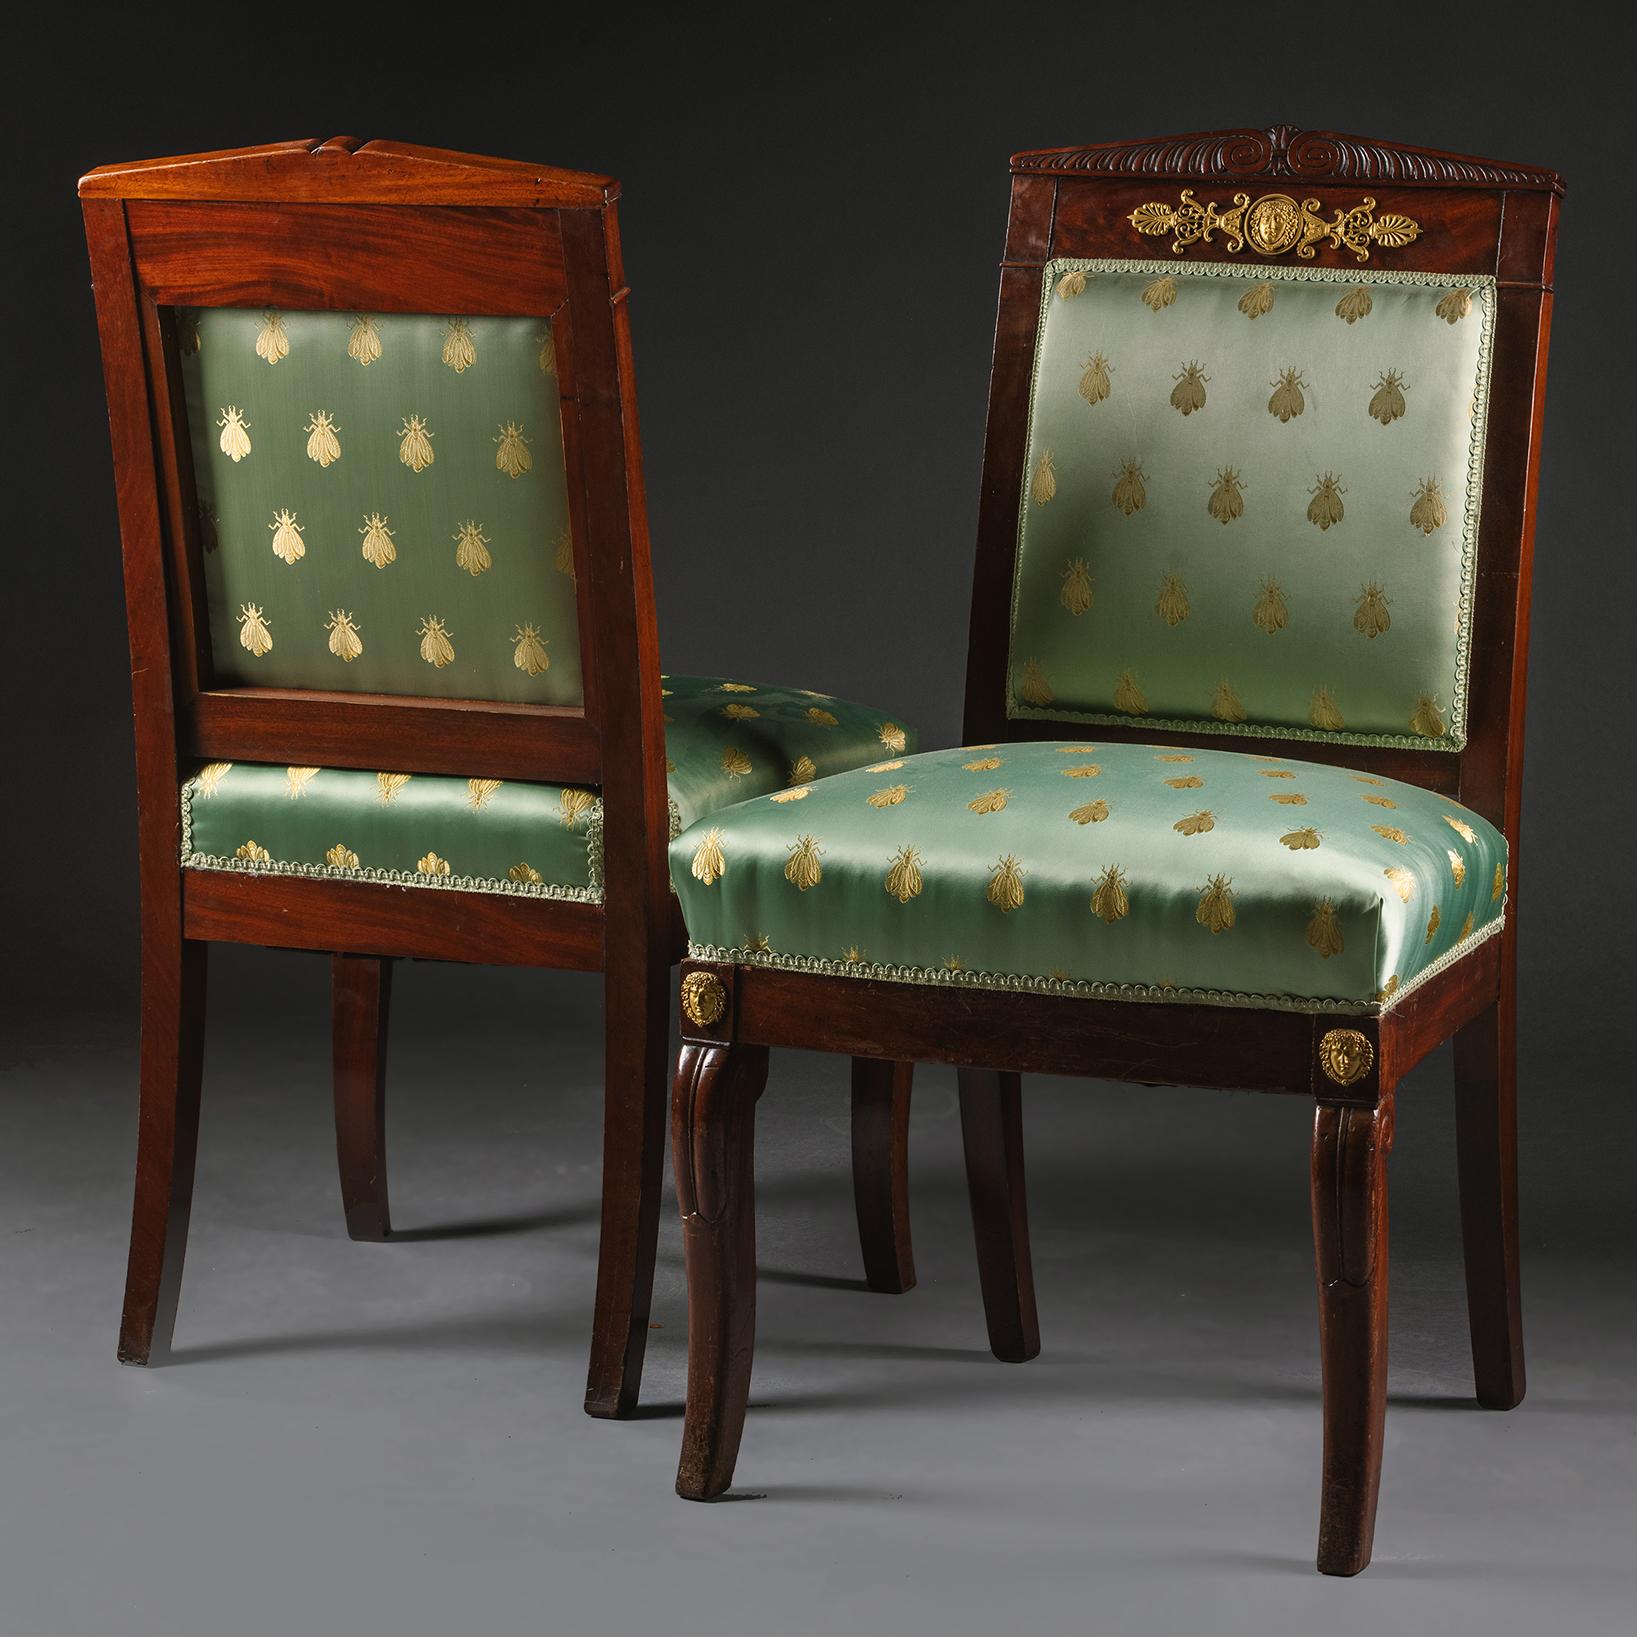 A pair of Empire Period gilt-bronze mounted side chairs.
 
French, Circa 1820.